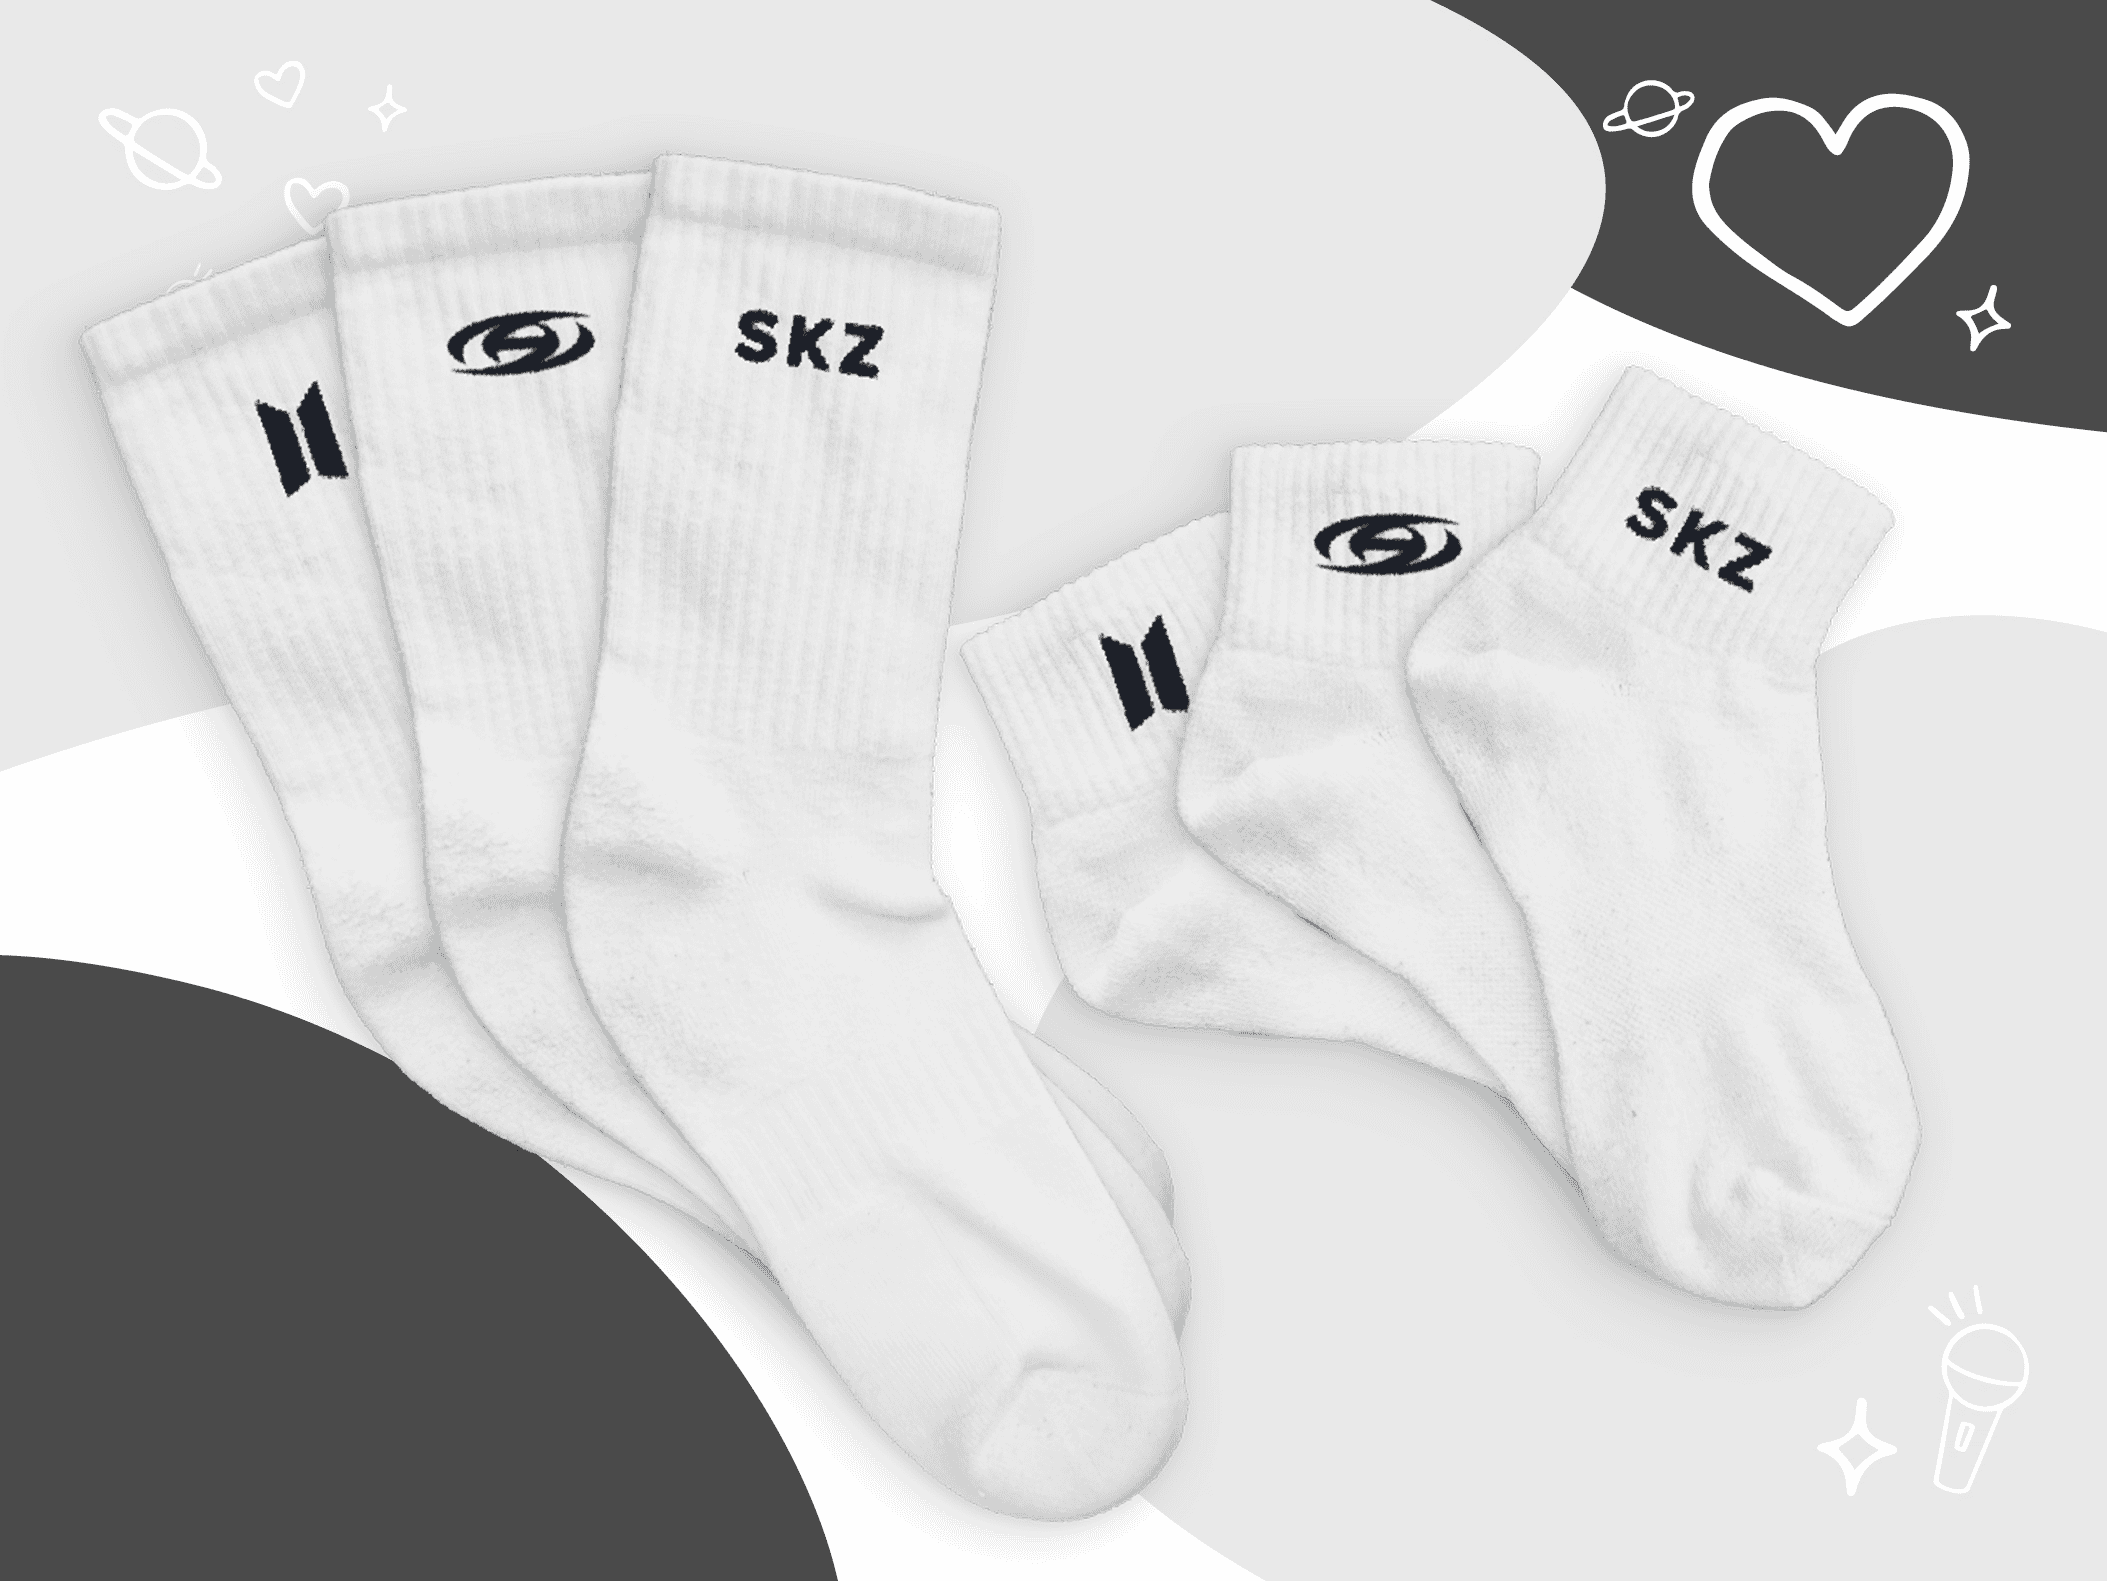 Workout Socks Multi Group - In Stock!